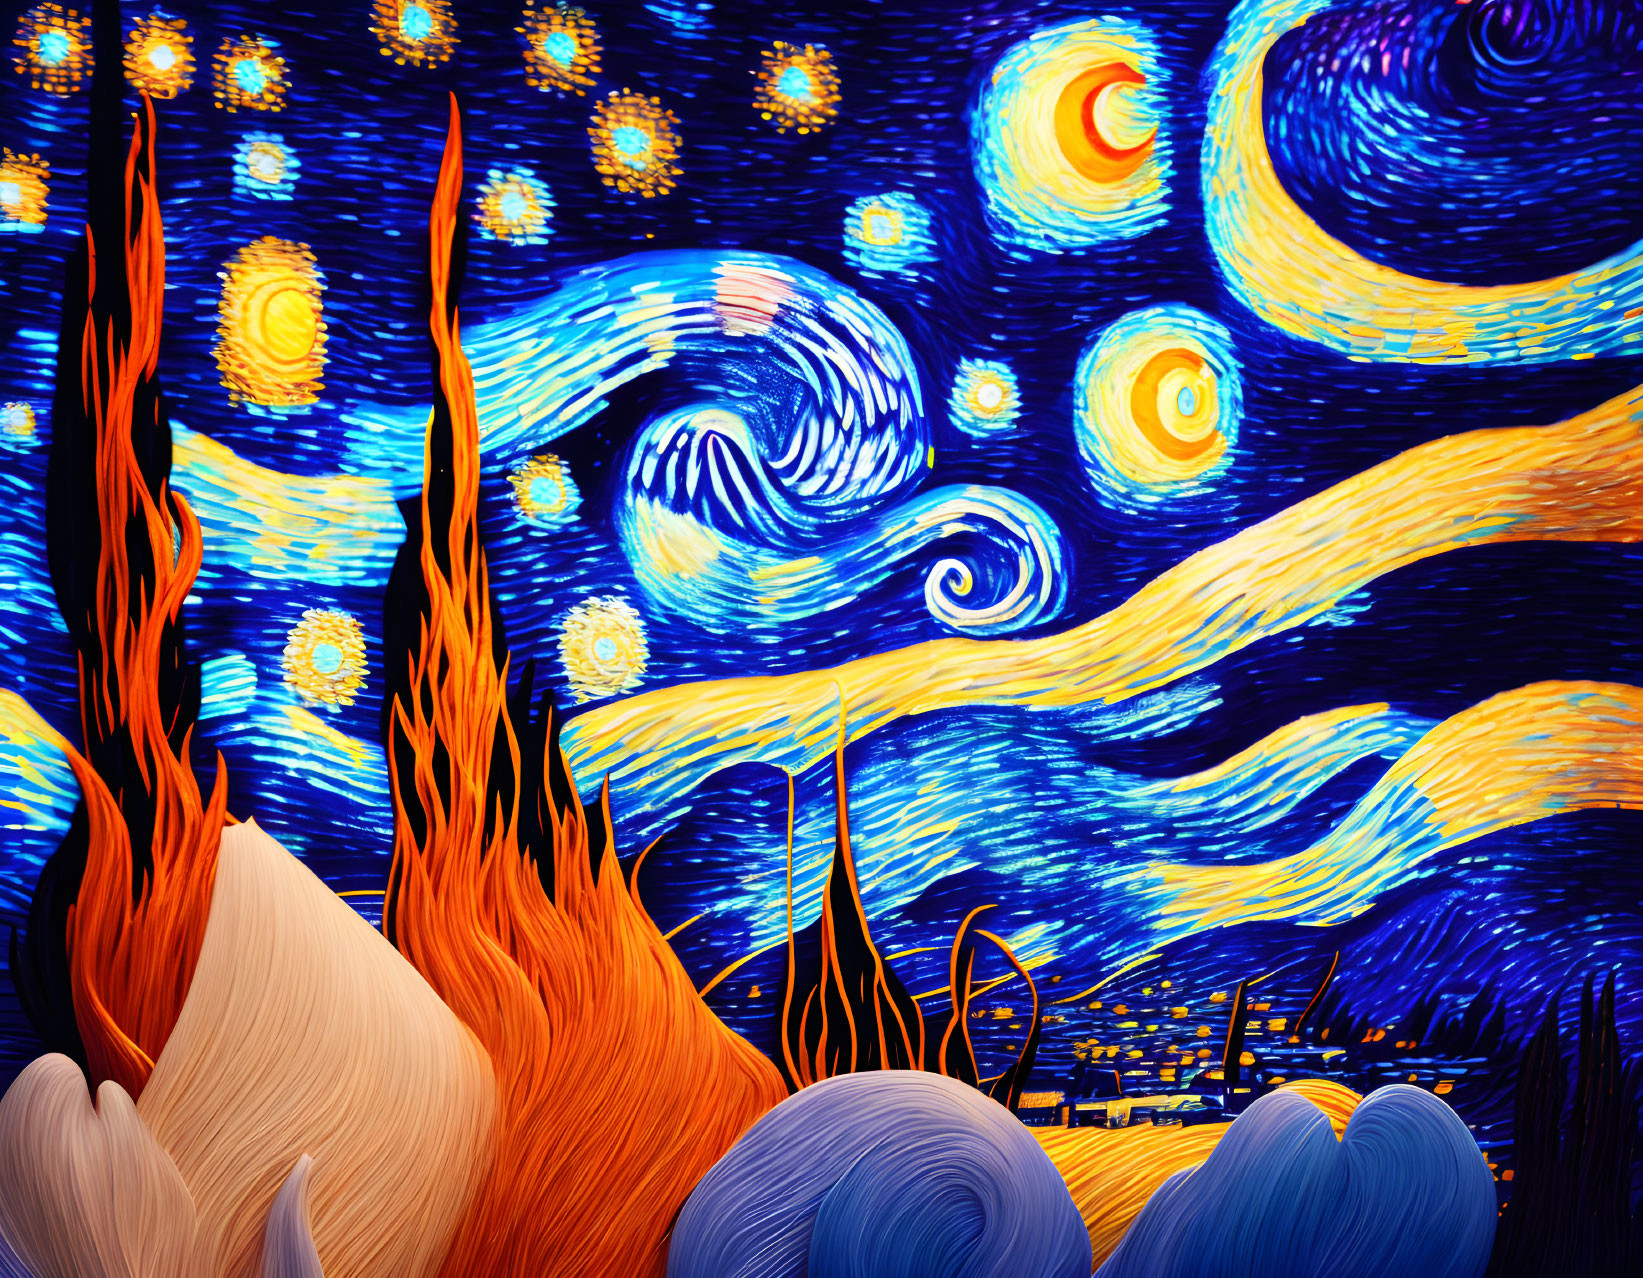 Colorful swirling patterns inspired by Starry Night with whimsical flame-like shapes.